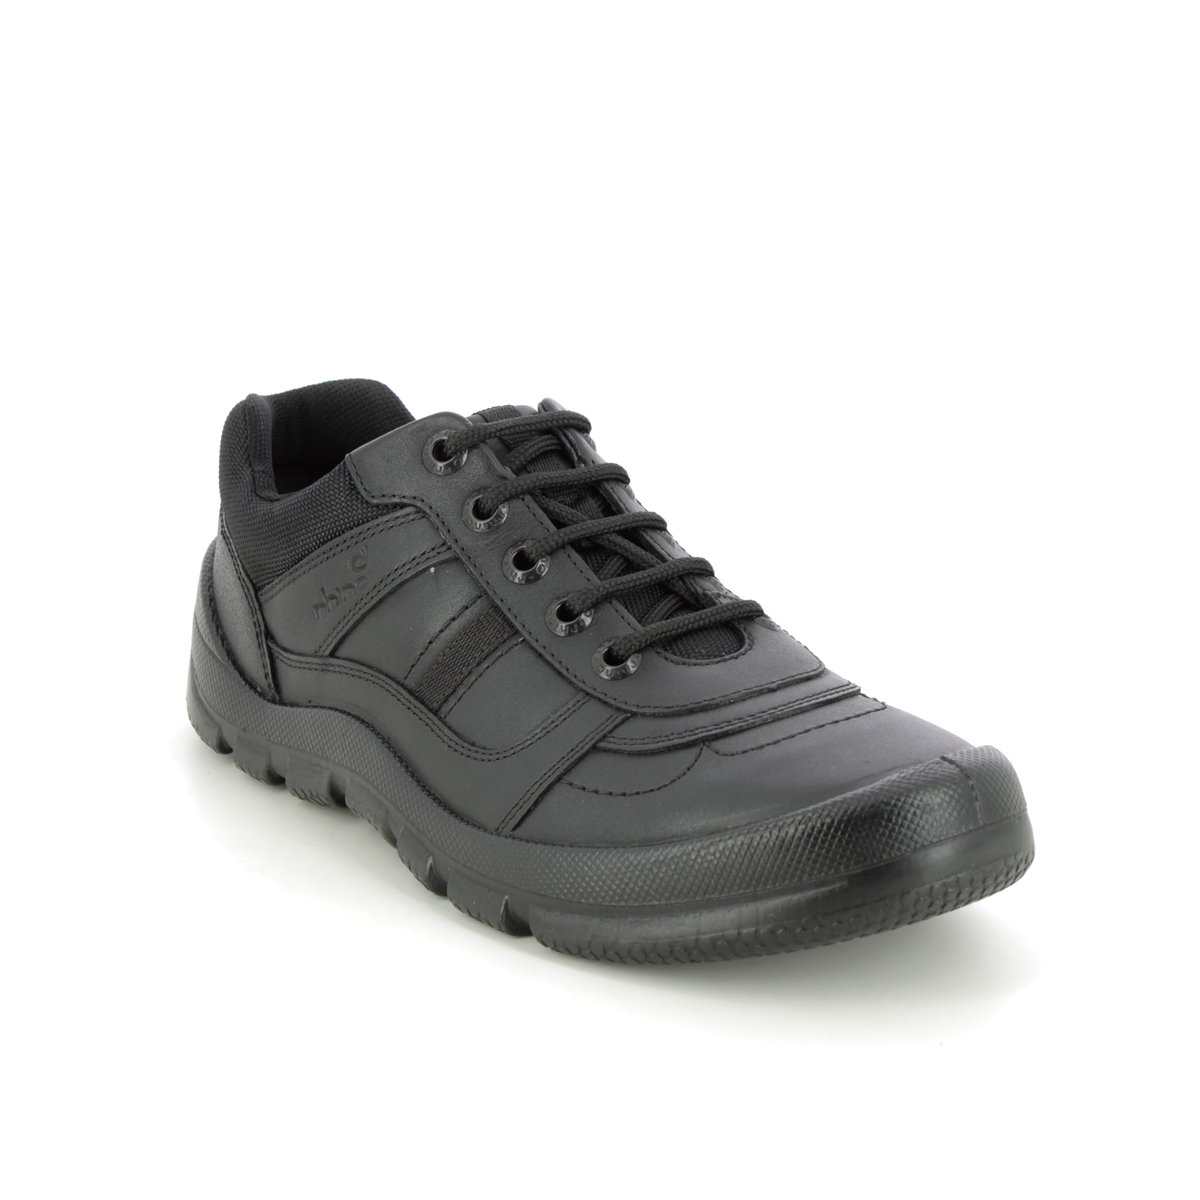 Start Rite - Rhino Warrior Lace In Black Leather 8238-76F In Size 5 In Plain Black Leather For School Boys Shoes  In Black Leather For kids